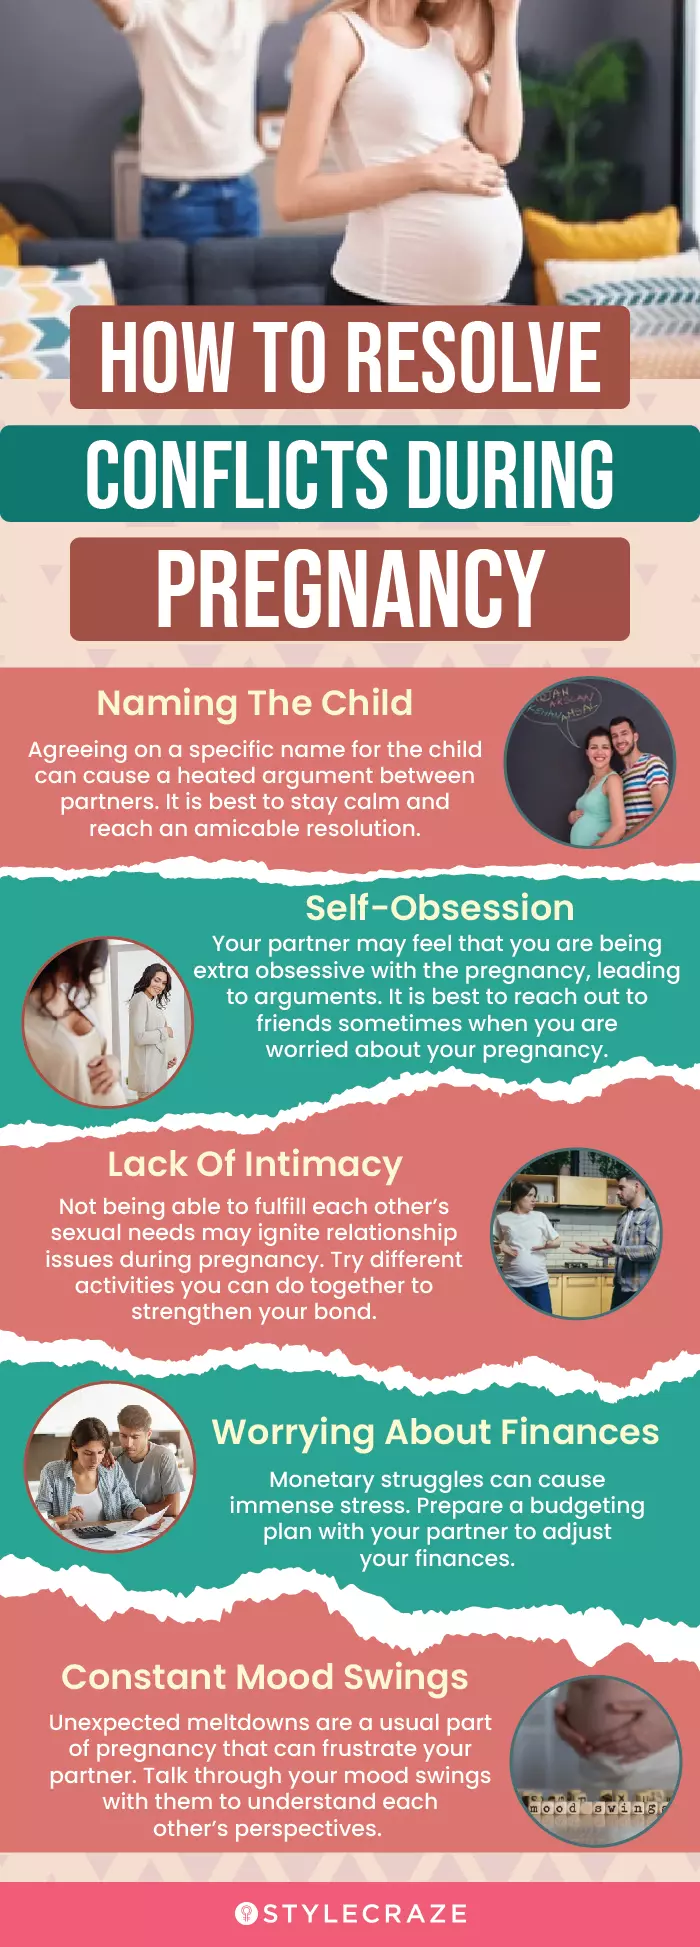 how to resolve conflicts during pregnancy (infographic)